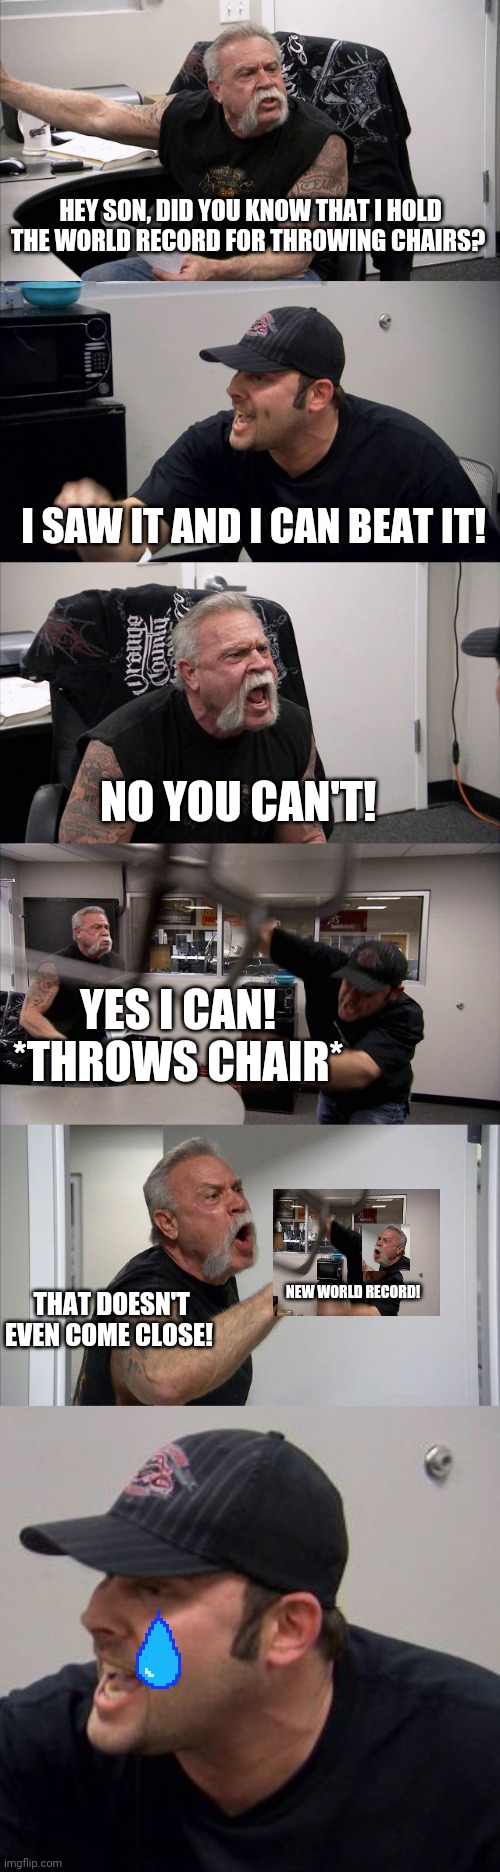 Image tagged in memes,american chopper argument,chair,world record